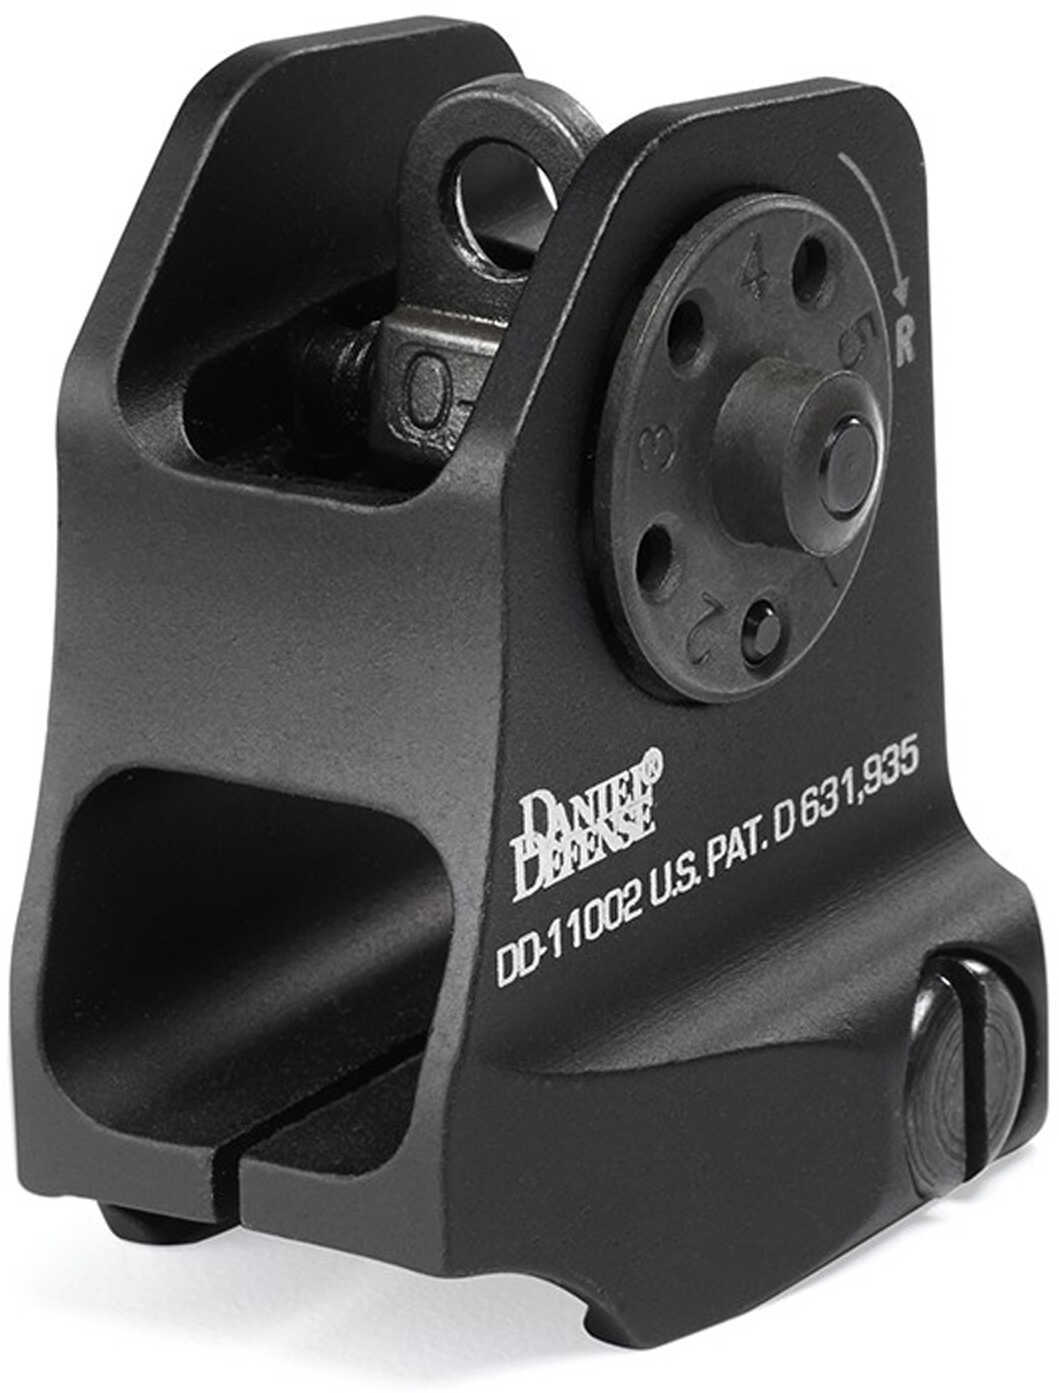 Daniel Defense A1.5 Fixed Rear Sight Optimum back up iron for use with reflex optics - Does not impede the DD-11002